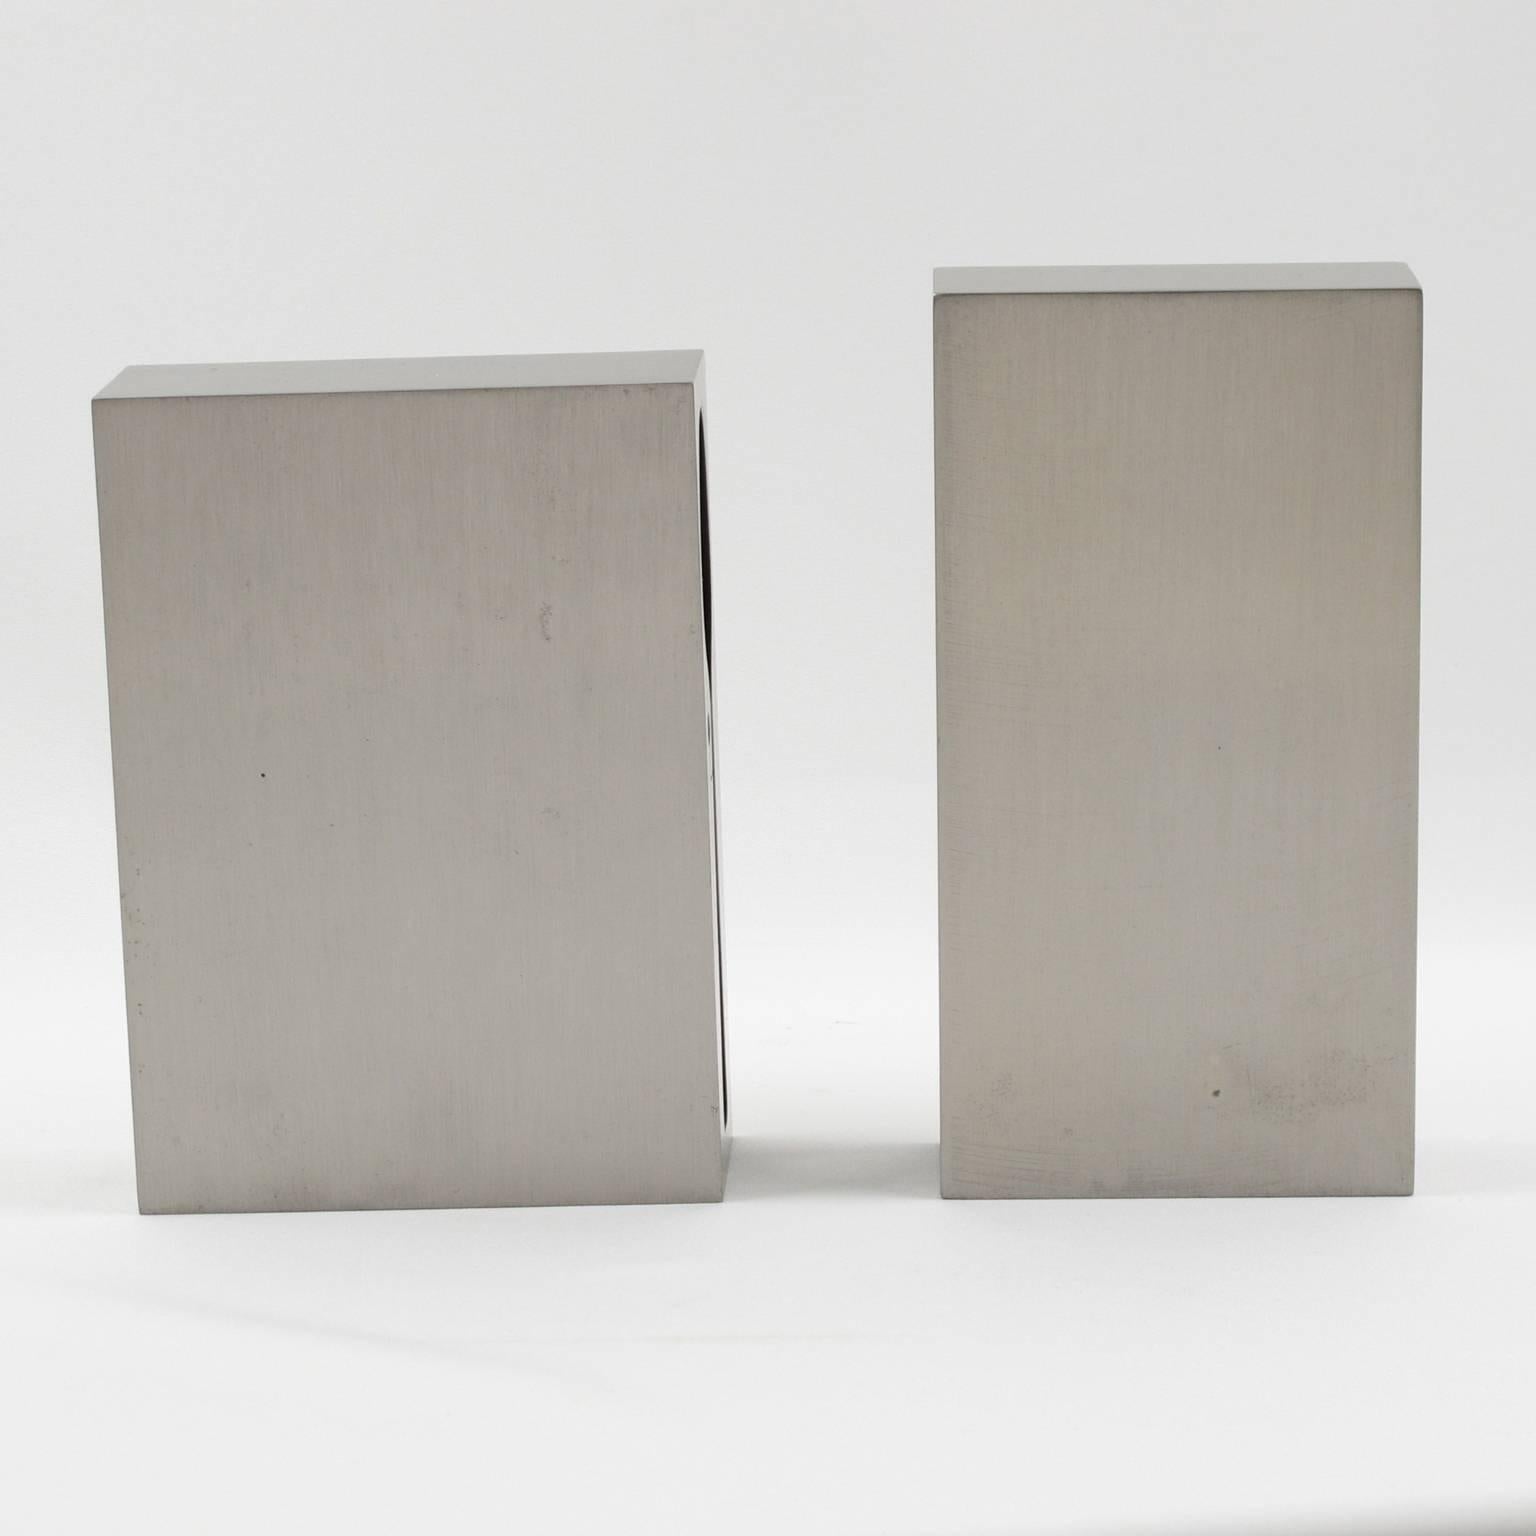 Late 20th Century Industrial Pair of Stainless Steel Spoon Mold Sculpture, Bookends